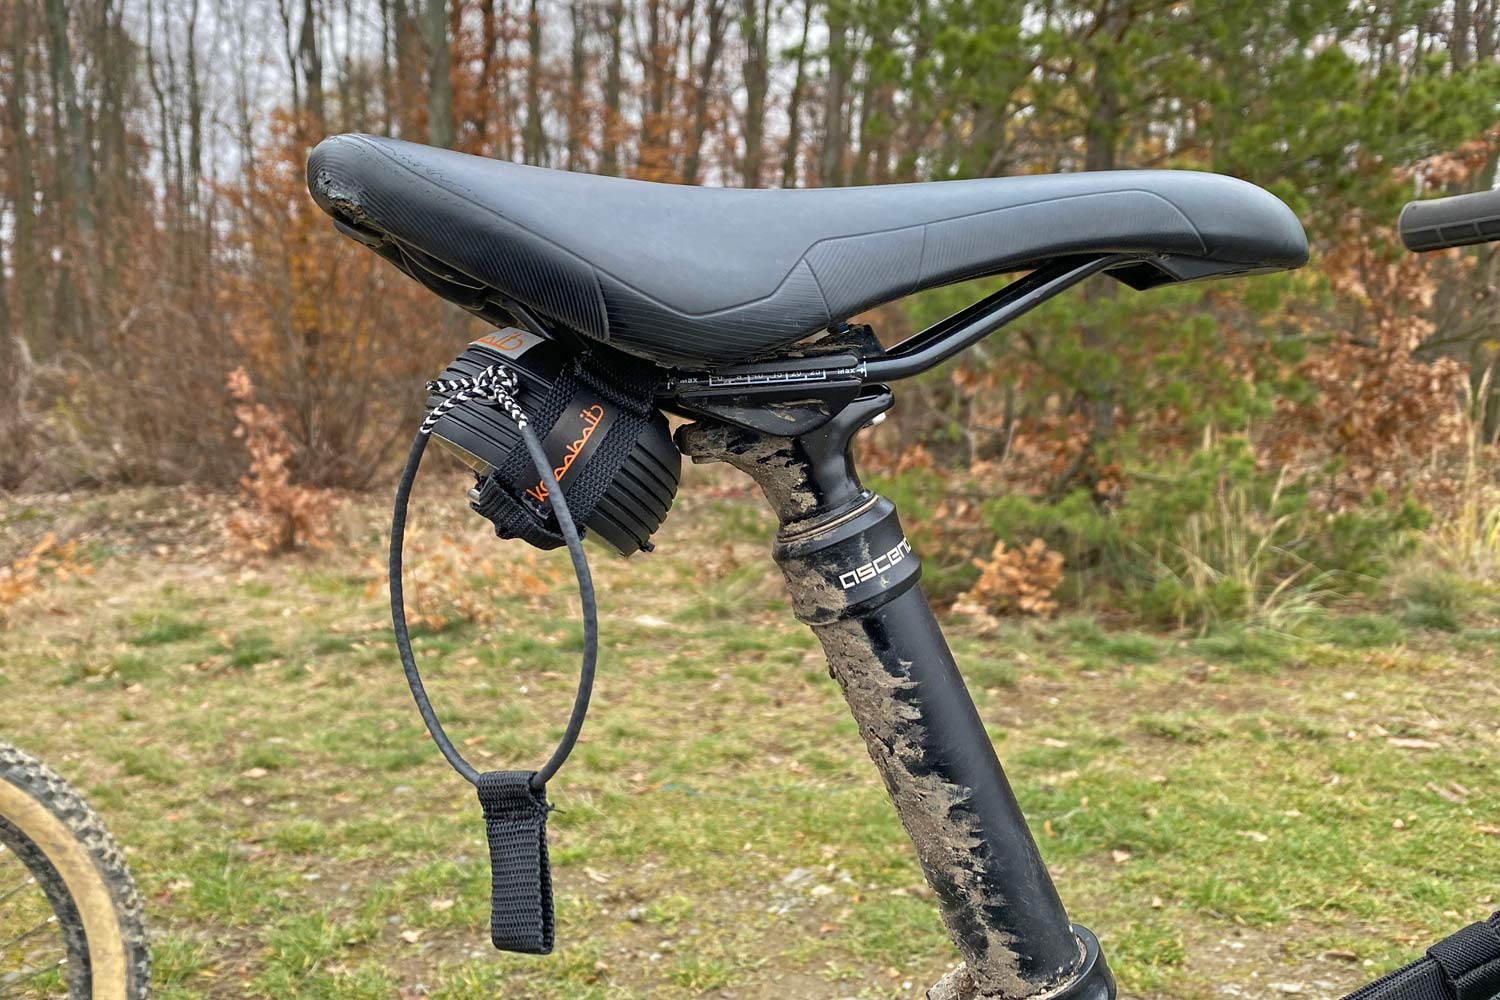 https://bikerumor.com/wp-content/uploads/2020/11/Kommit-retractable-tow-rope_Come-With-Me-lightweight-compact-towing-system-for-kids-and-adults.jpg